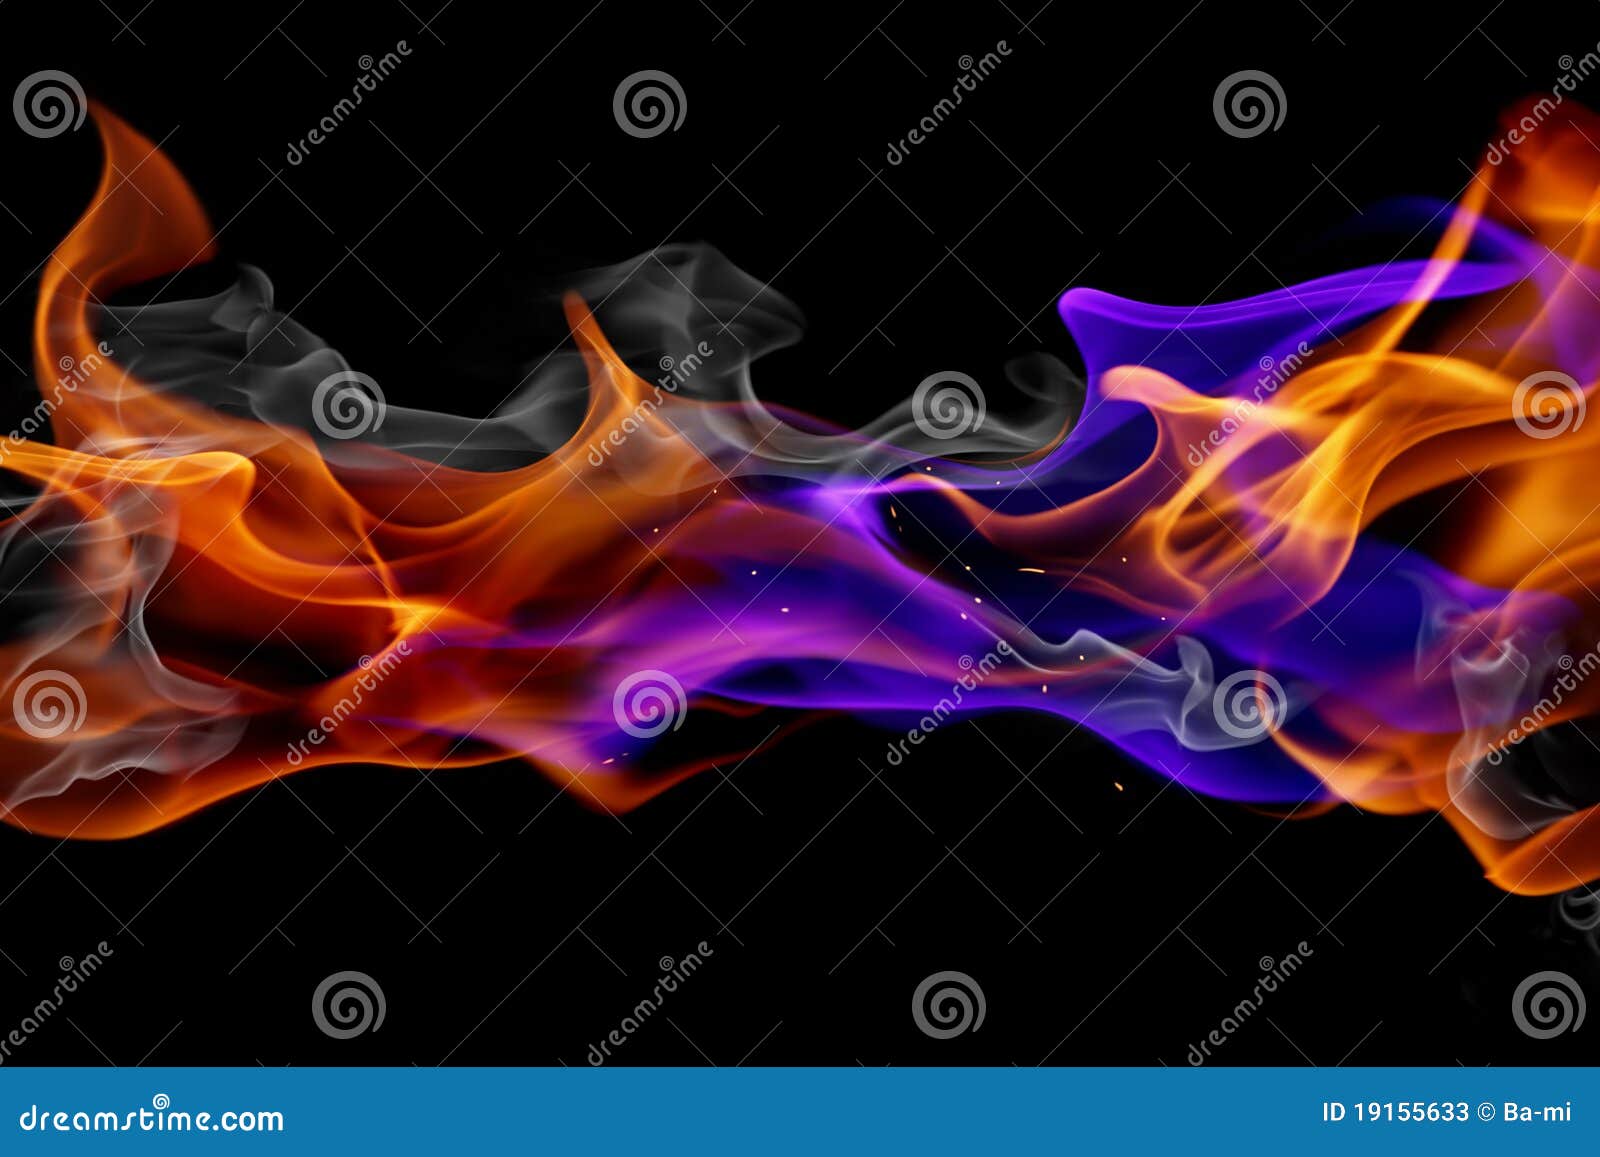 blue and red fire